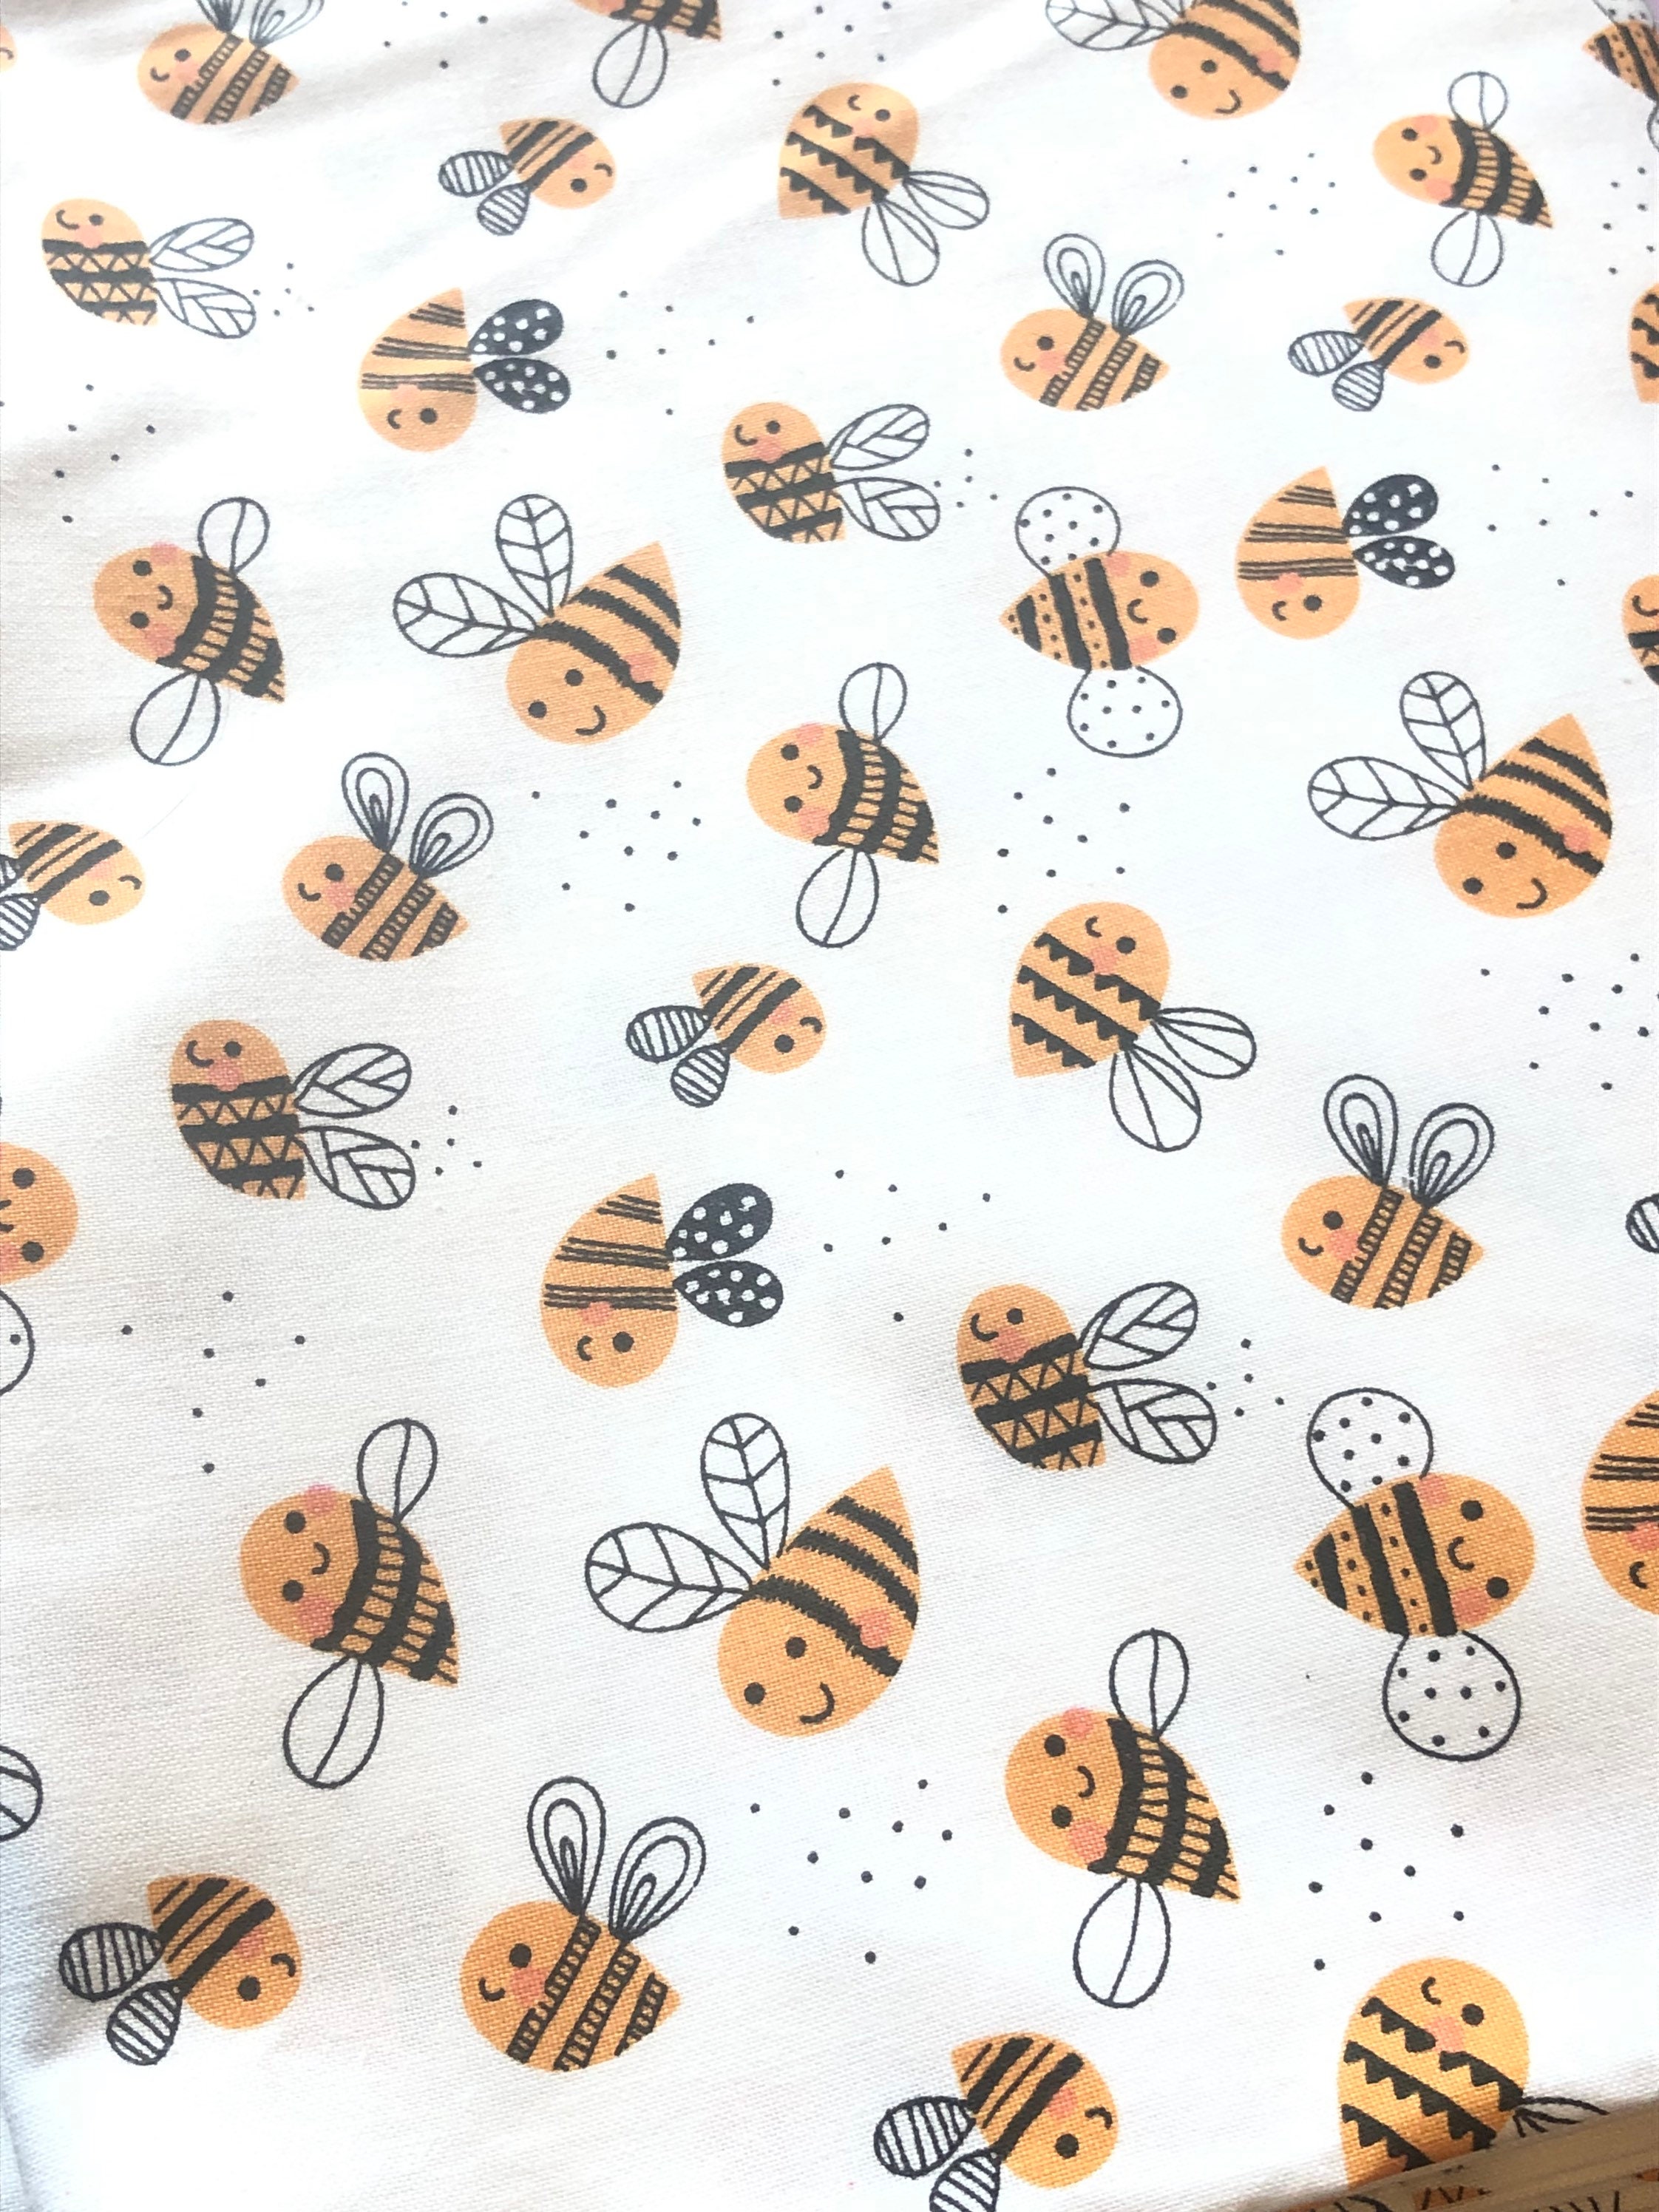  Cartoon Bee Outdoor Fabric by The Yard,Cute Bee Wild Animal  Fabric by The Yard for Teens Adults Craft Lover,Yellow Honeycomb Geometry  Pattern Upholstery Fabric for Clothing Quilting Sewing,10 Yards